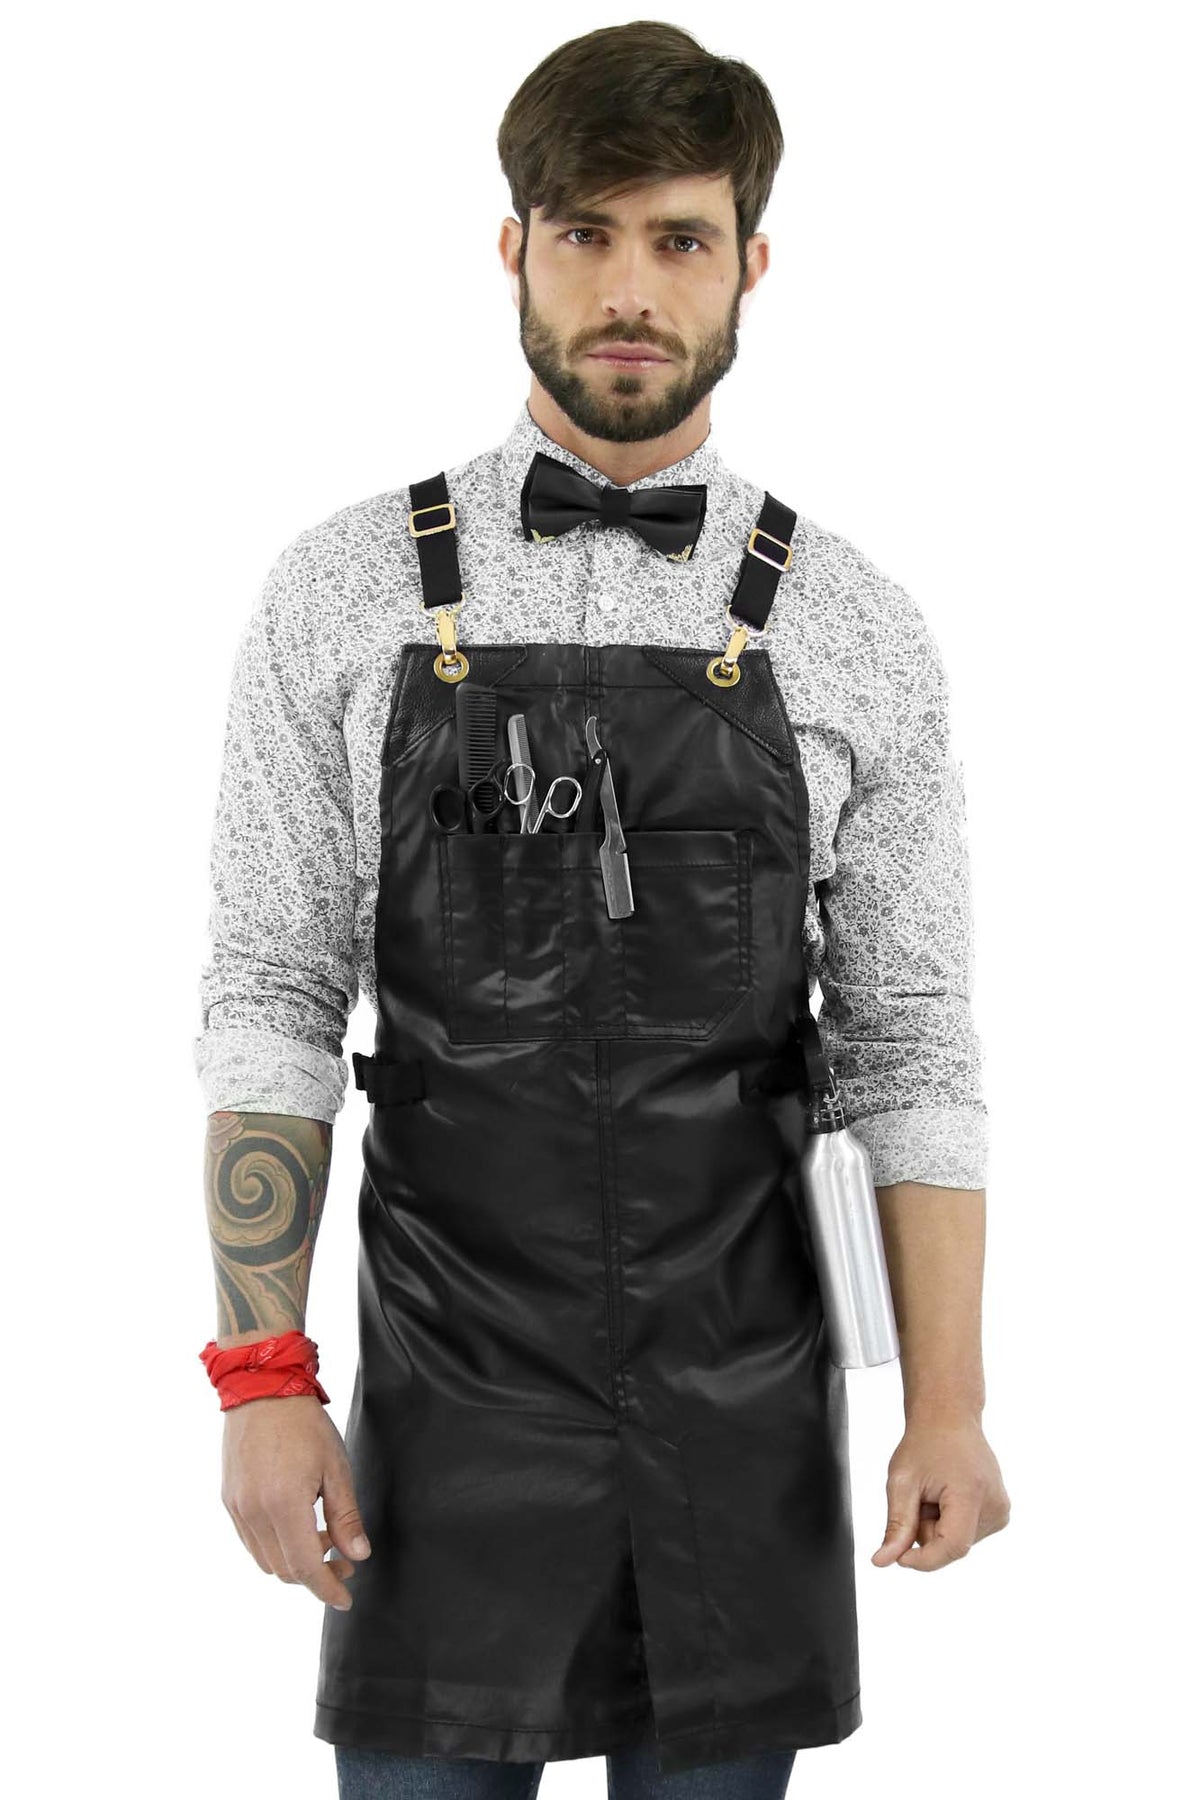 Barber Apron - CrossBack, Water Resistant Coated Fabric, Split-Leg - Salon, Hairstylist - Under NY Sky